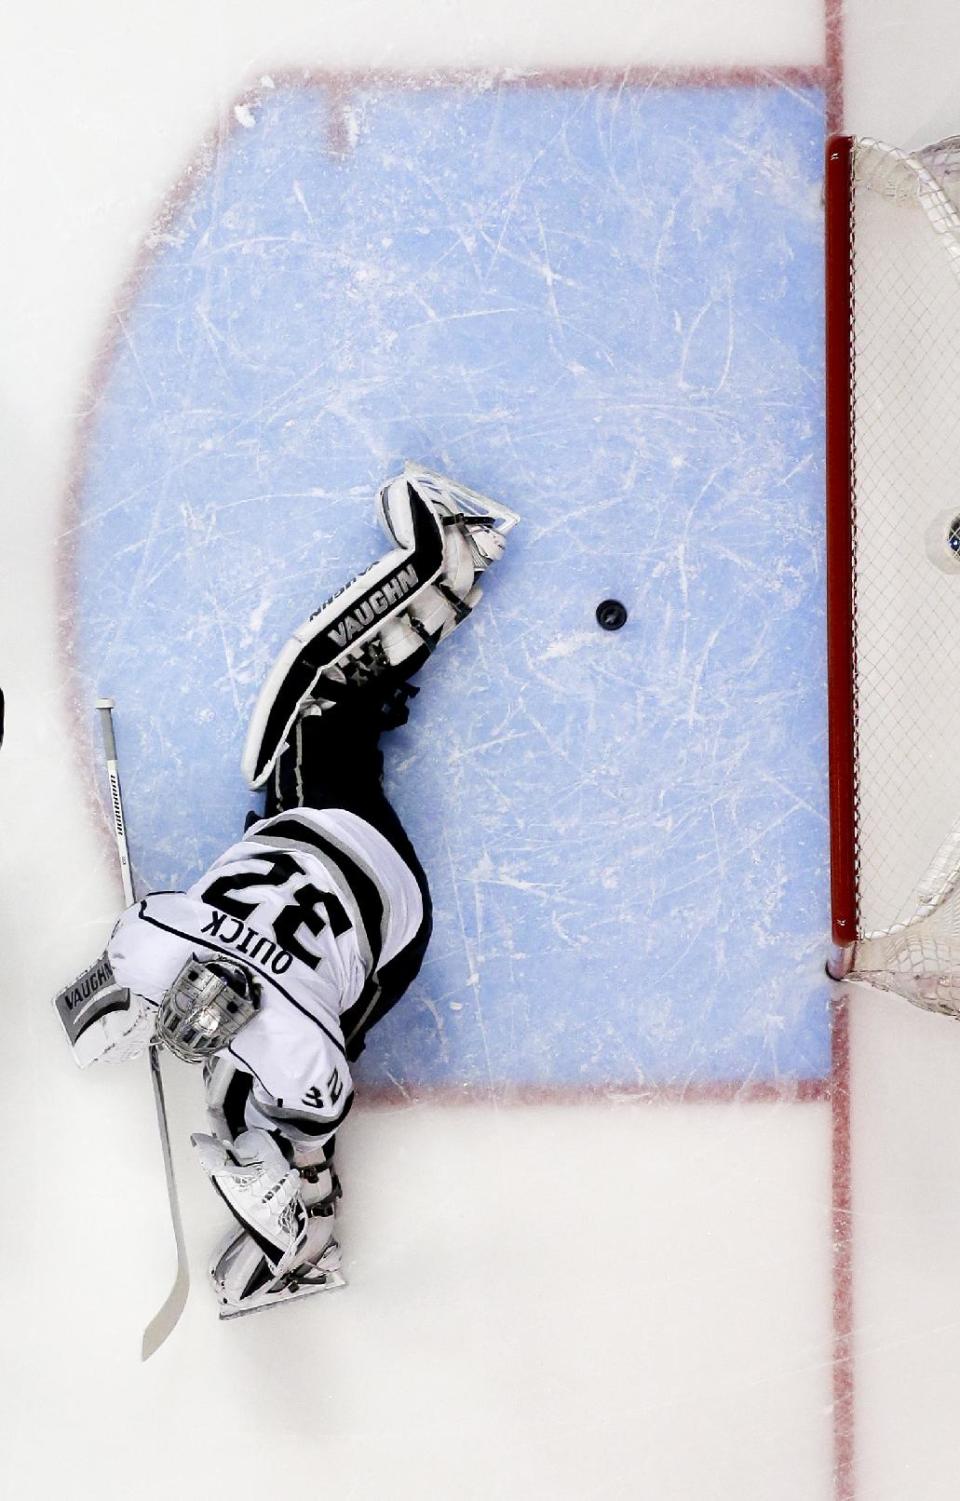 Los Angeles Kings goalie Jonathan Quick fails to stop a goal by Anaheim Ducks center Nick Bonino during the first period in Game 5 of an NHL hockey second-round Stanley Cup playoff series in Anaheim, Calif., Monday, May 12, 2014. (AP Photo/Chris Carlson)